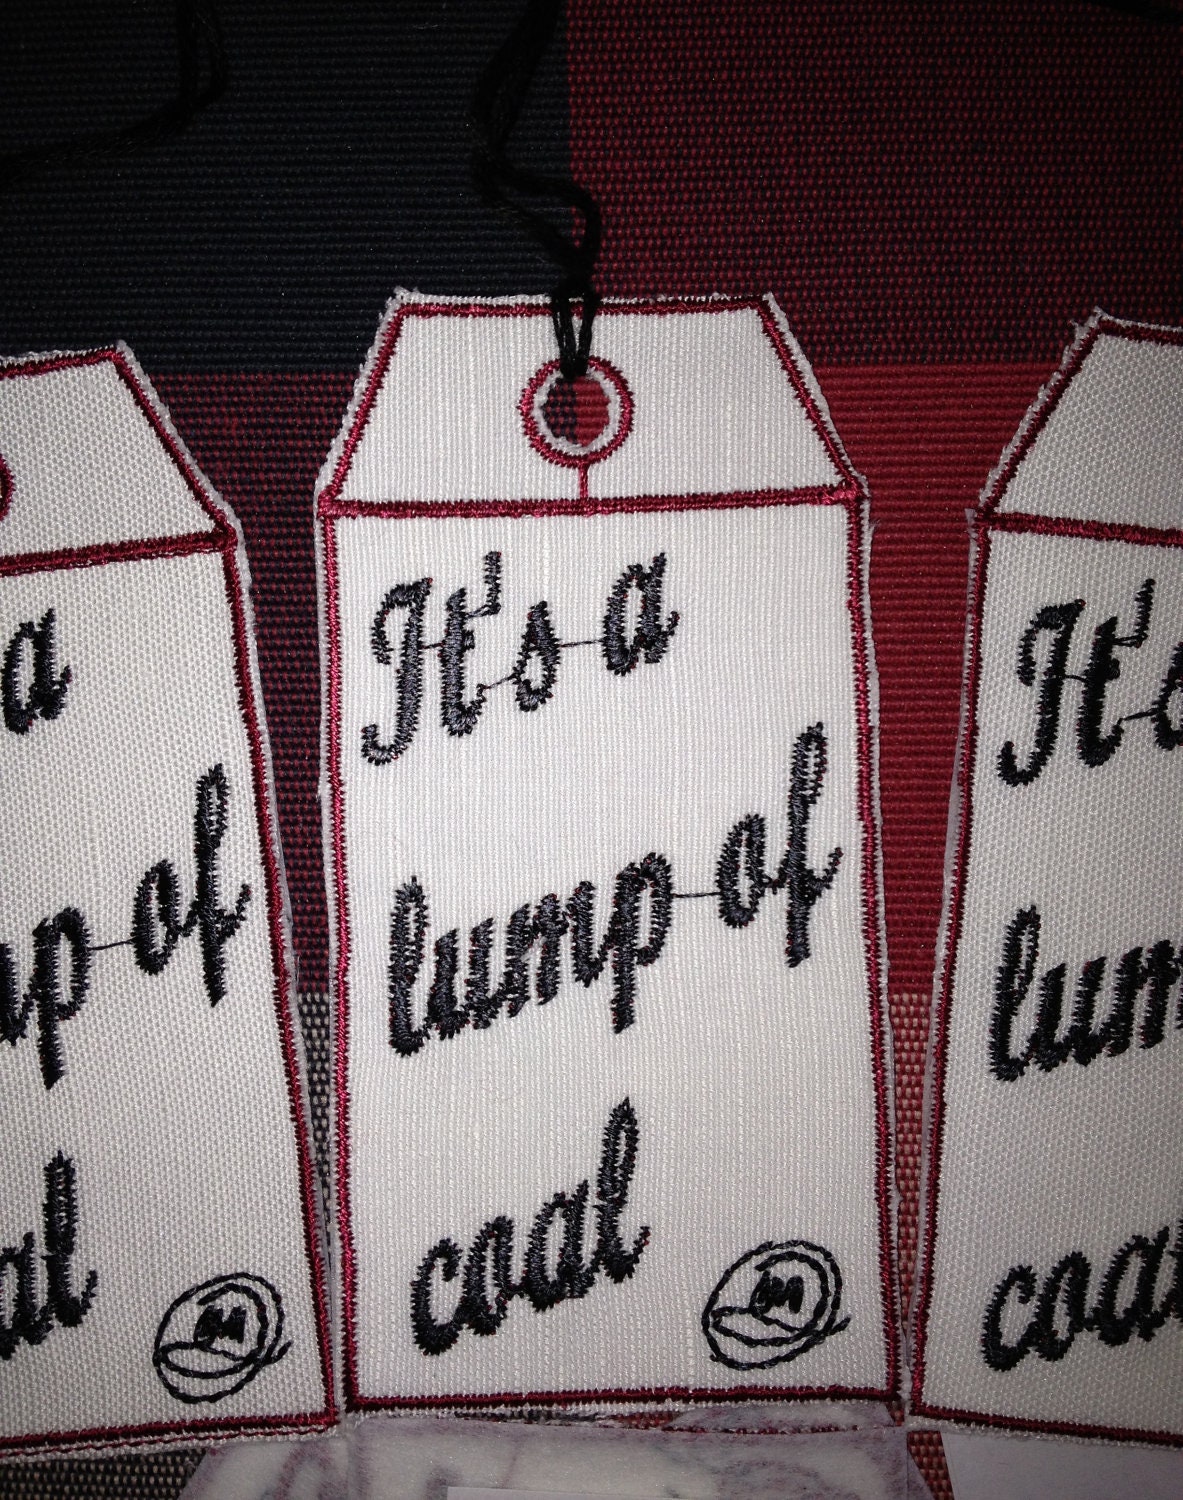 Set of 3 - Homemade Embroidery It's a lump of coal, Gift Tags - Reusable